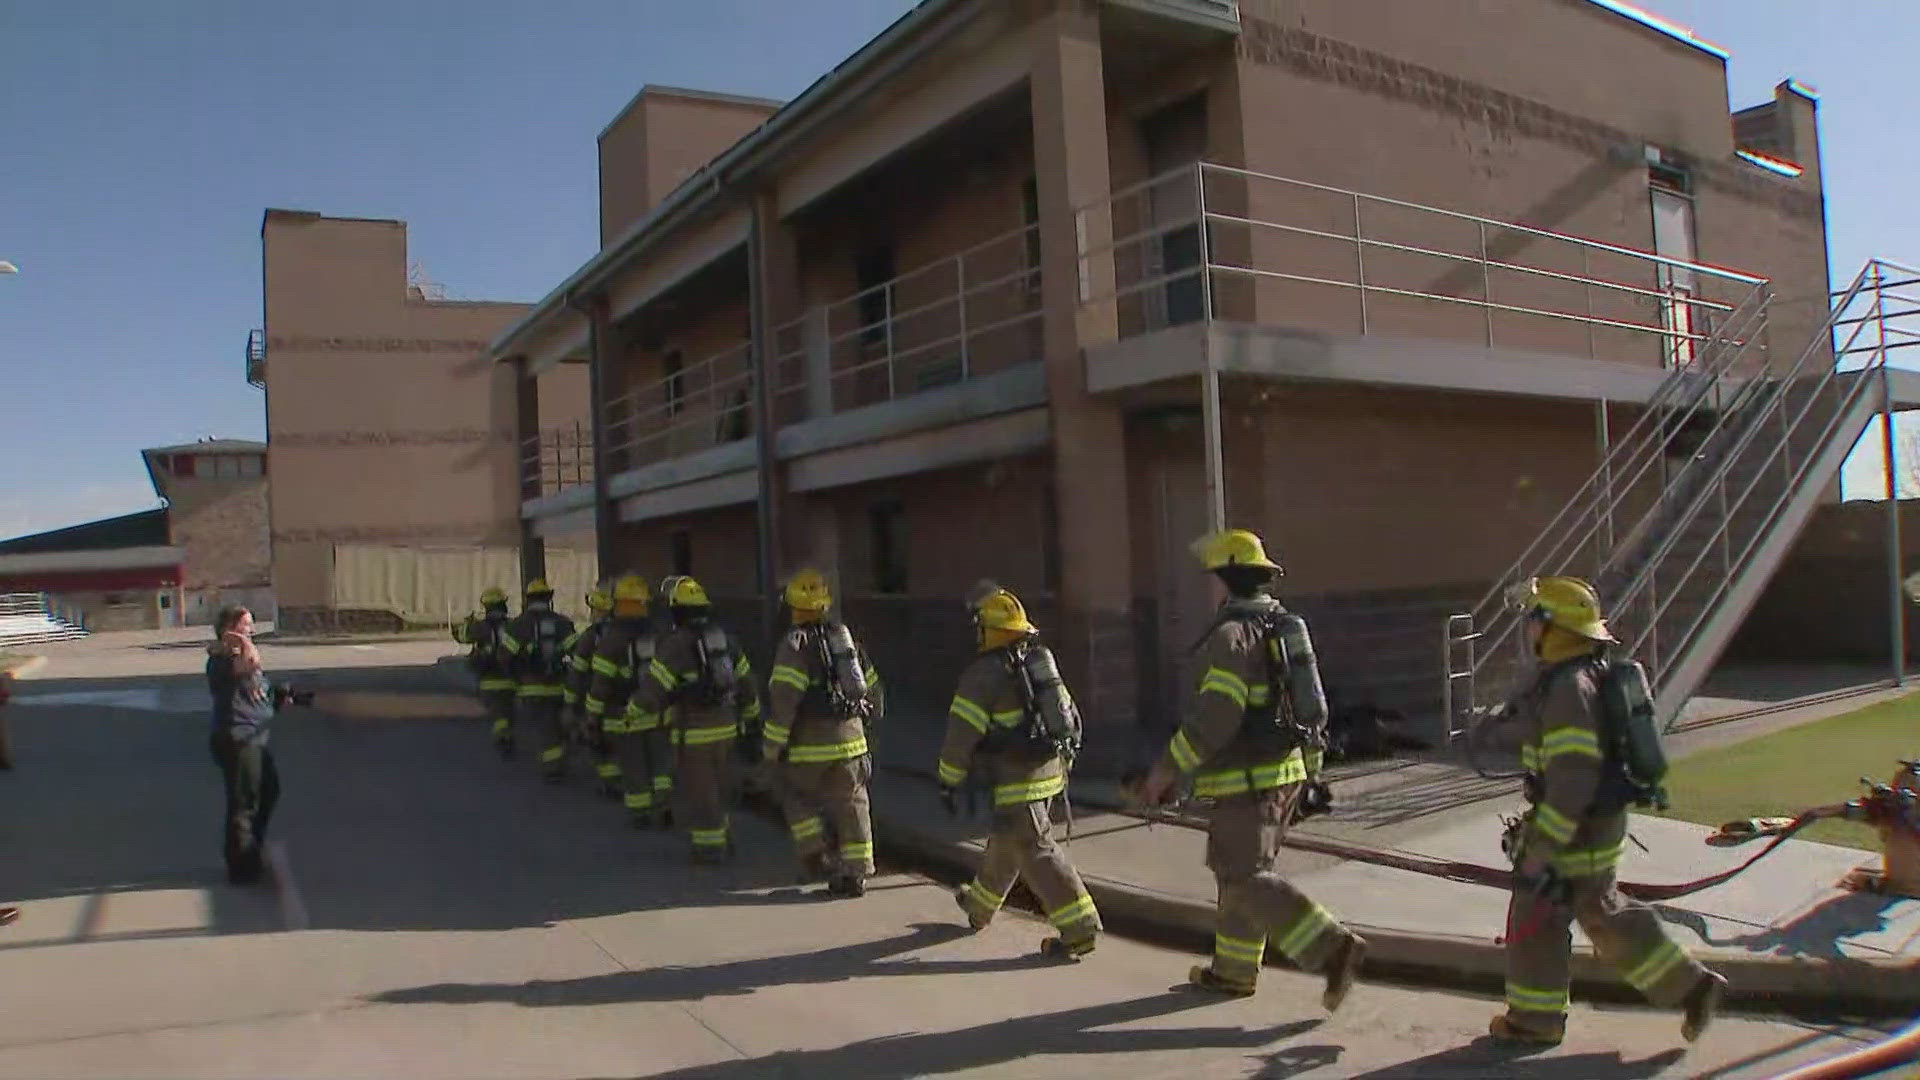 High School students in the Adams 12 school district are learning first-hand what it takes to become a firefighter.